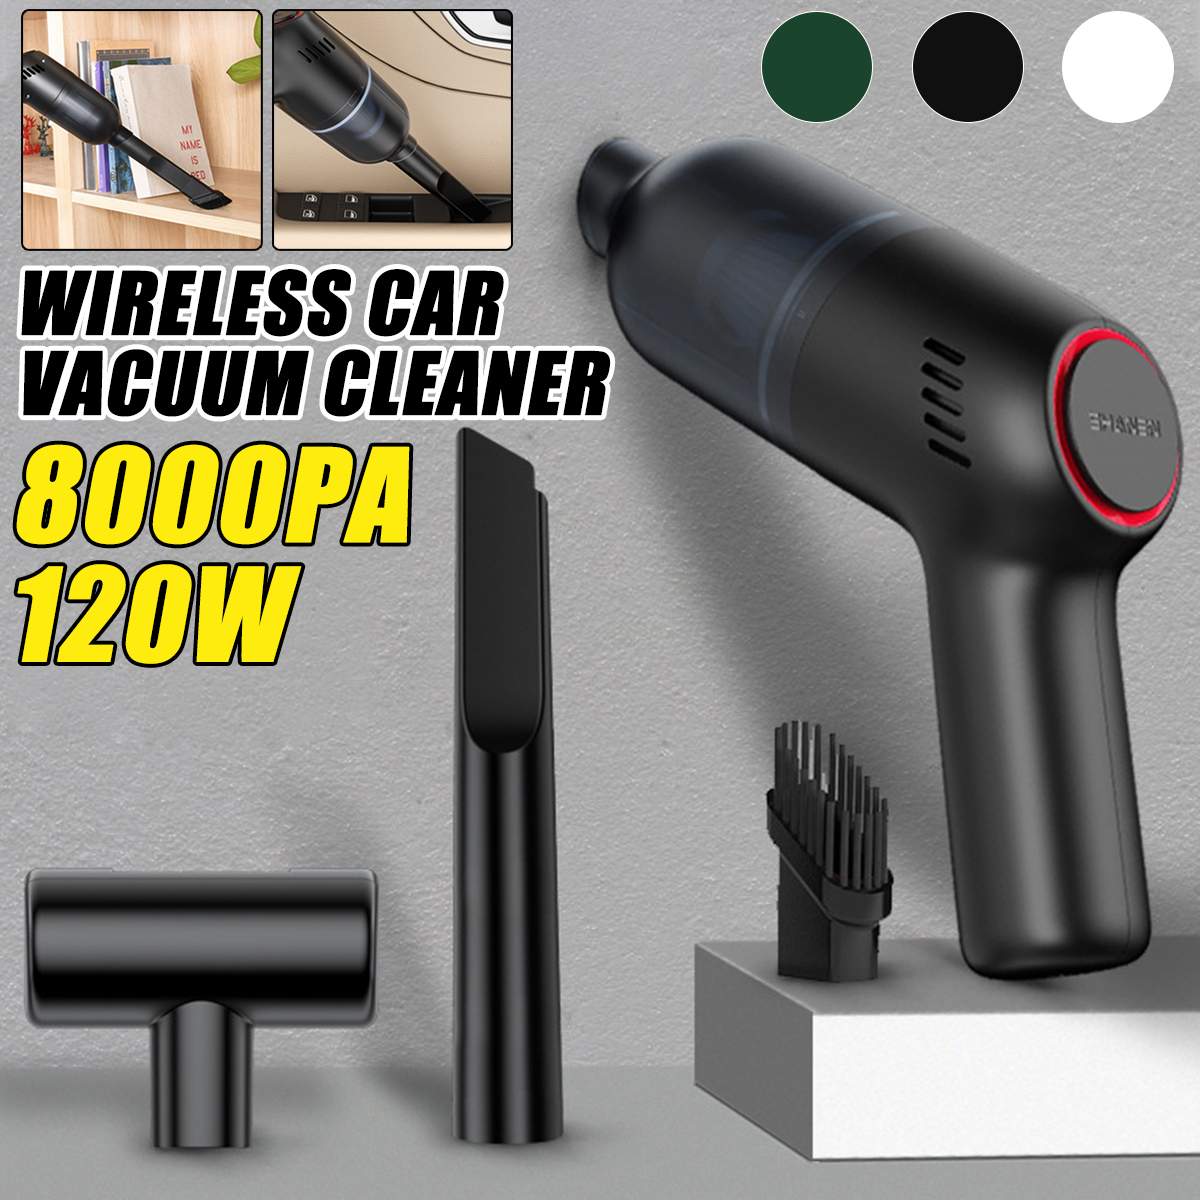 Wireless-Rechargeable-8000Pa-Suction-Car-Vacuum-Cleaner-Portable-Home-Duster-1806425-2